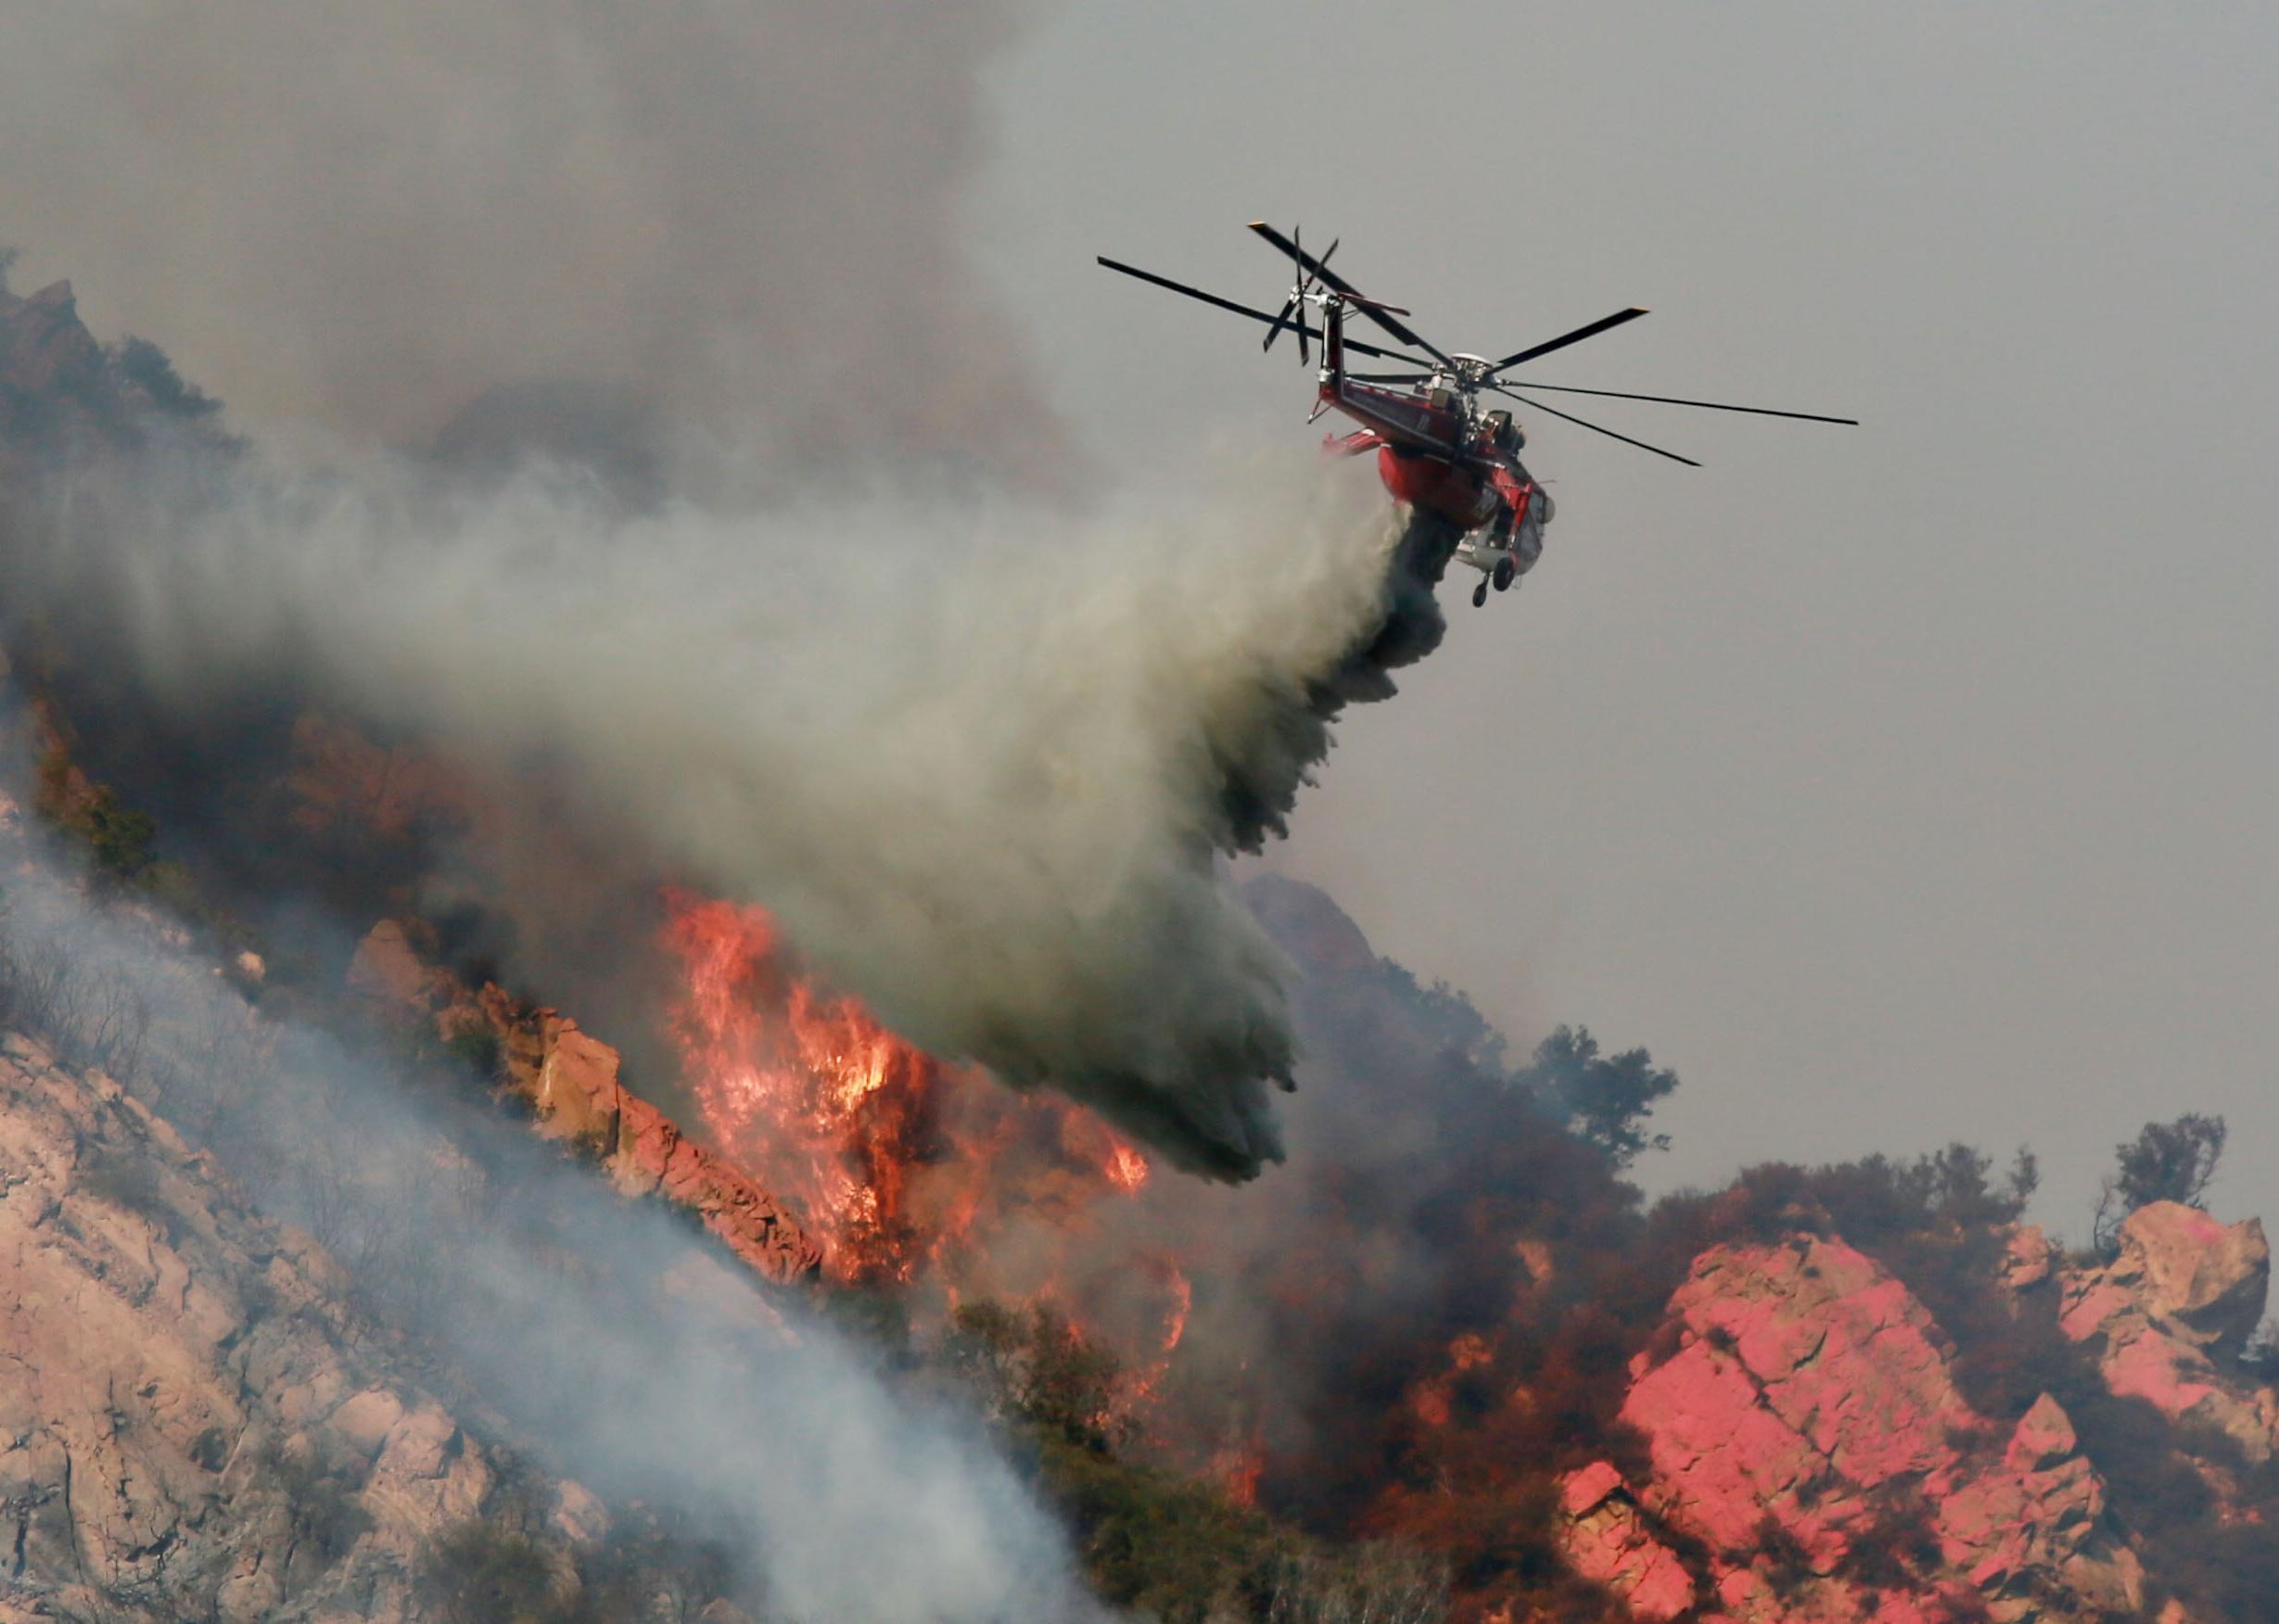  A helicopter drops flame retardant on a wildfire in Malibu, California.